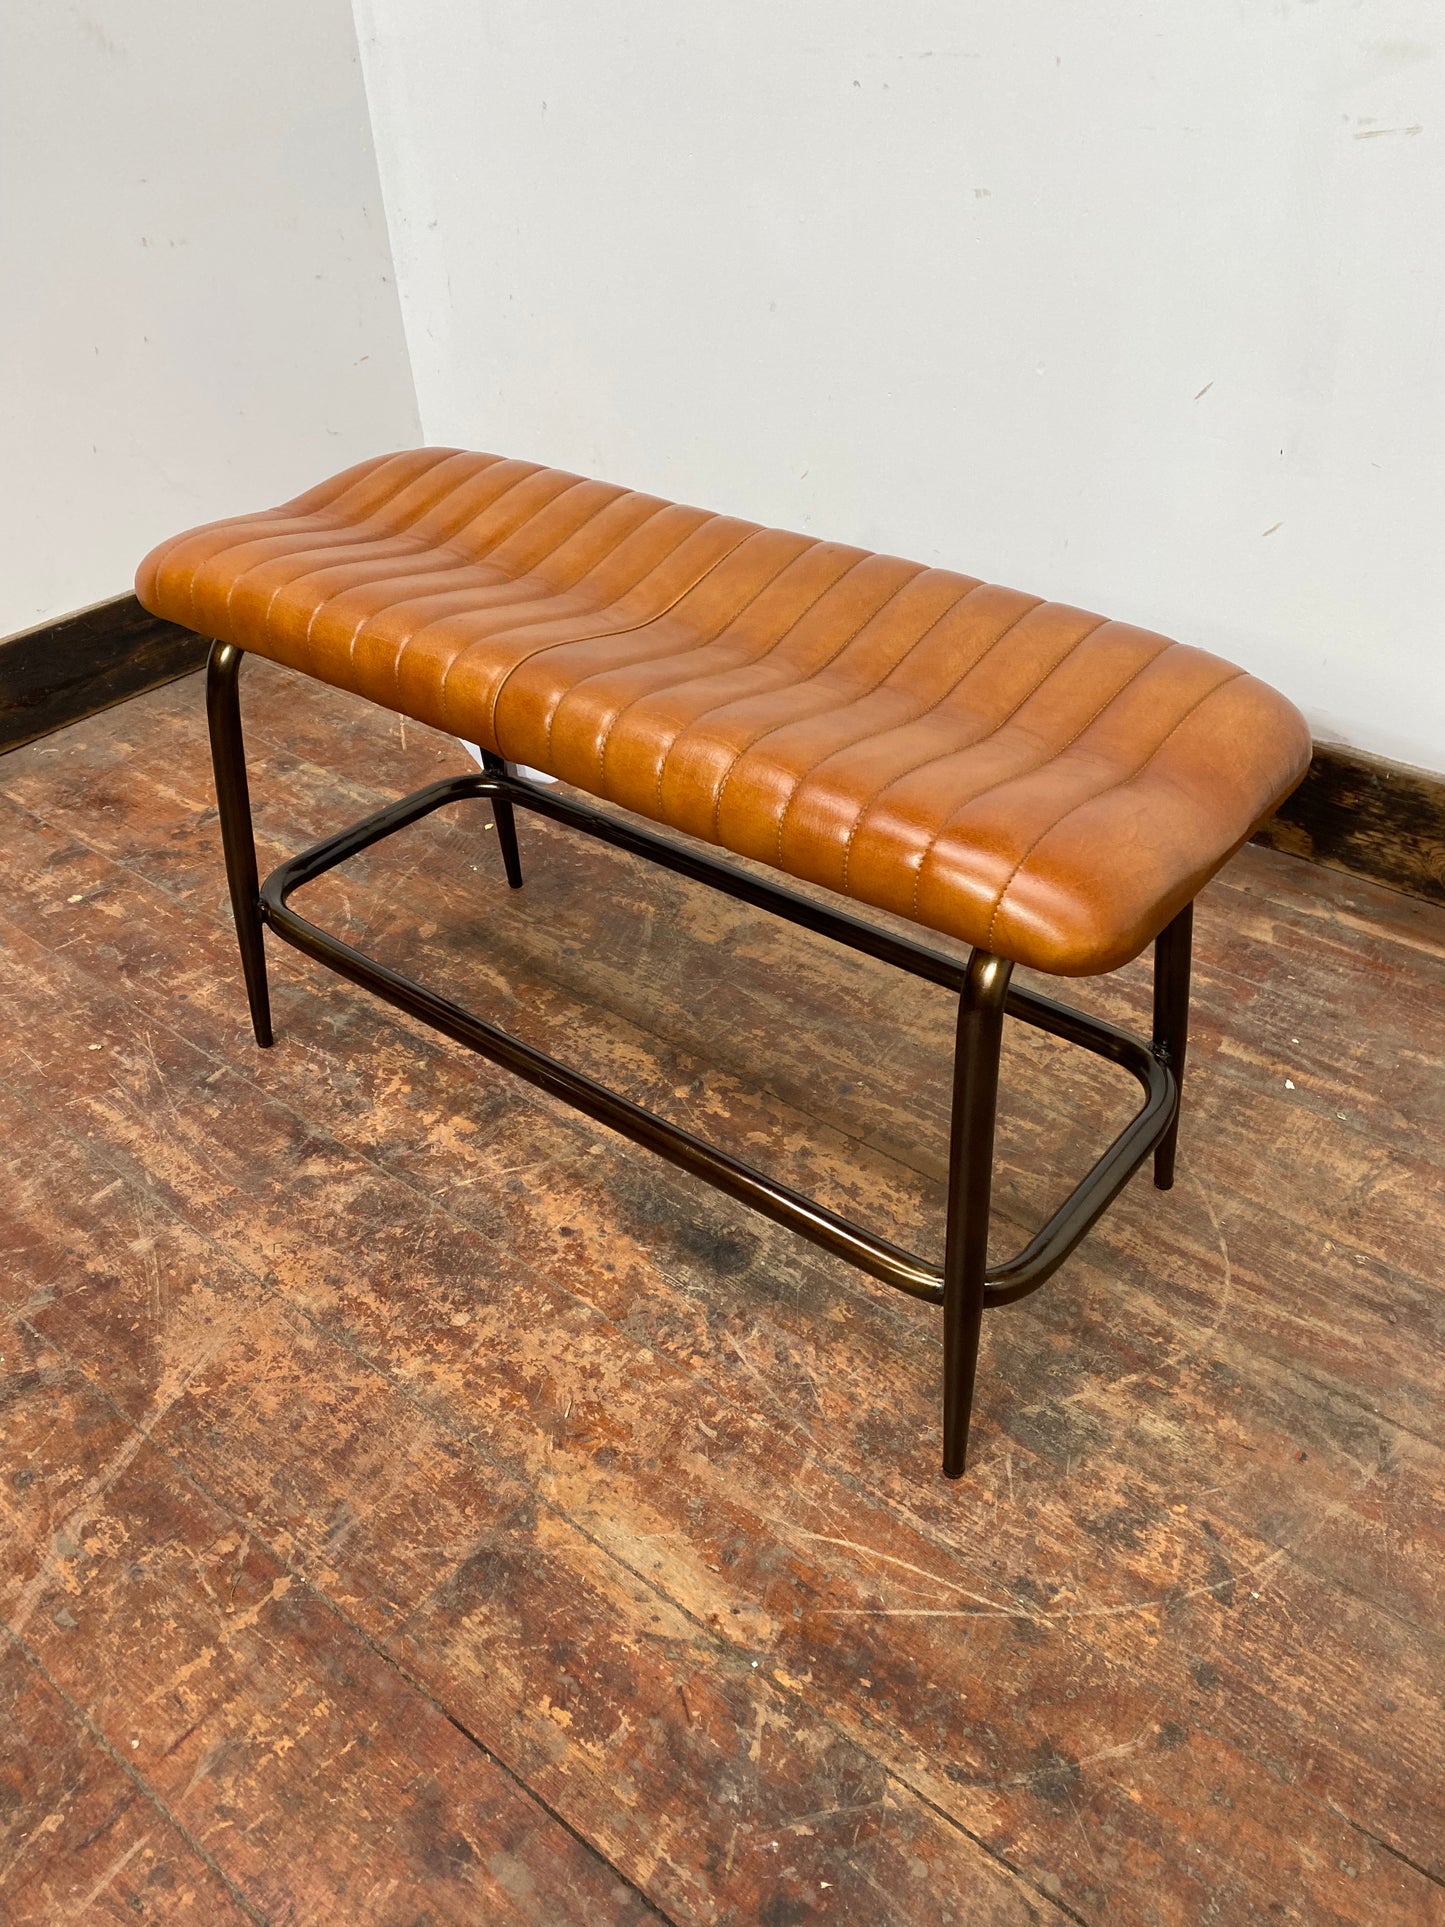 Tan Leather Bench